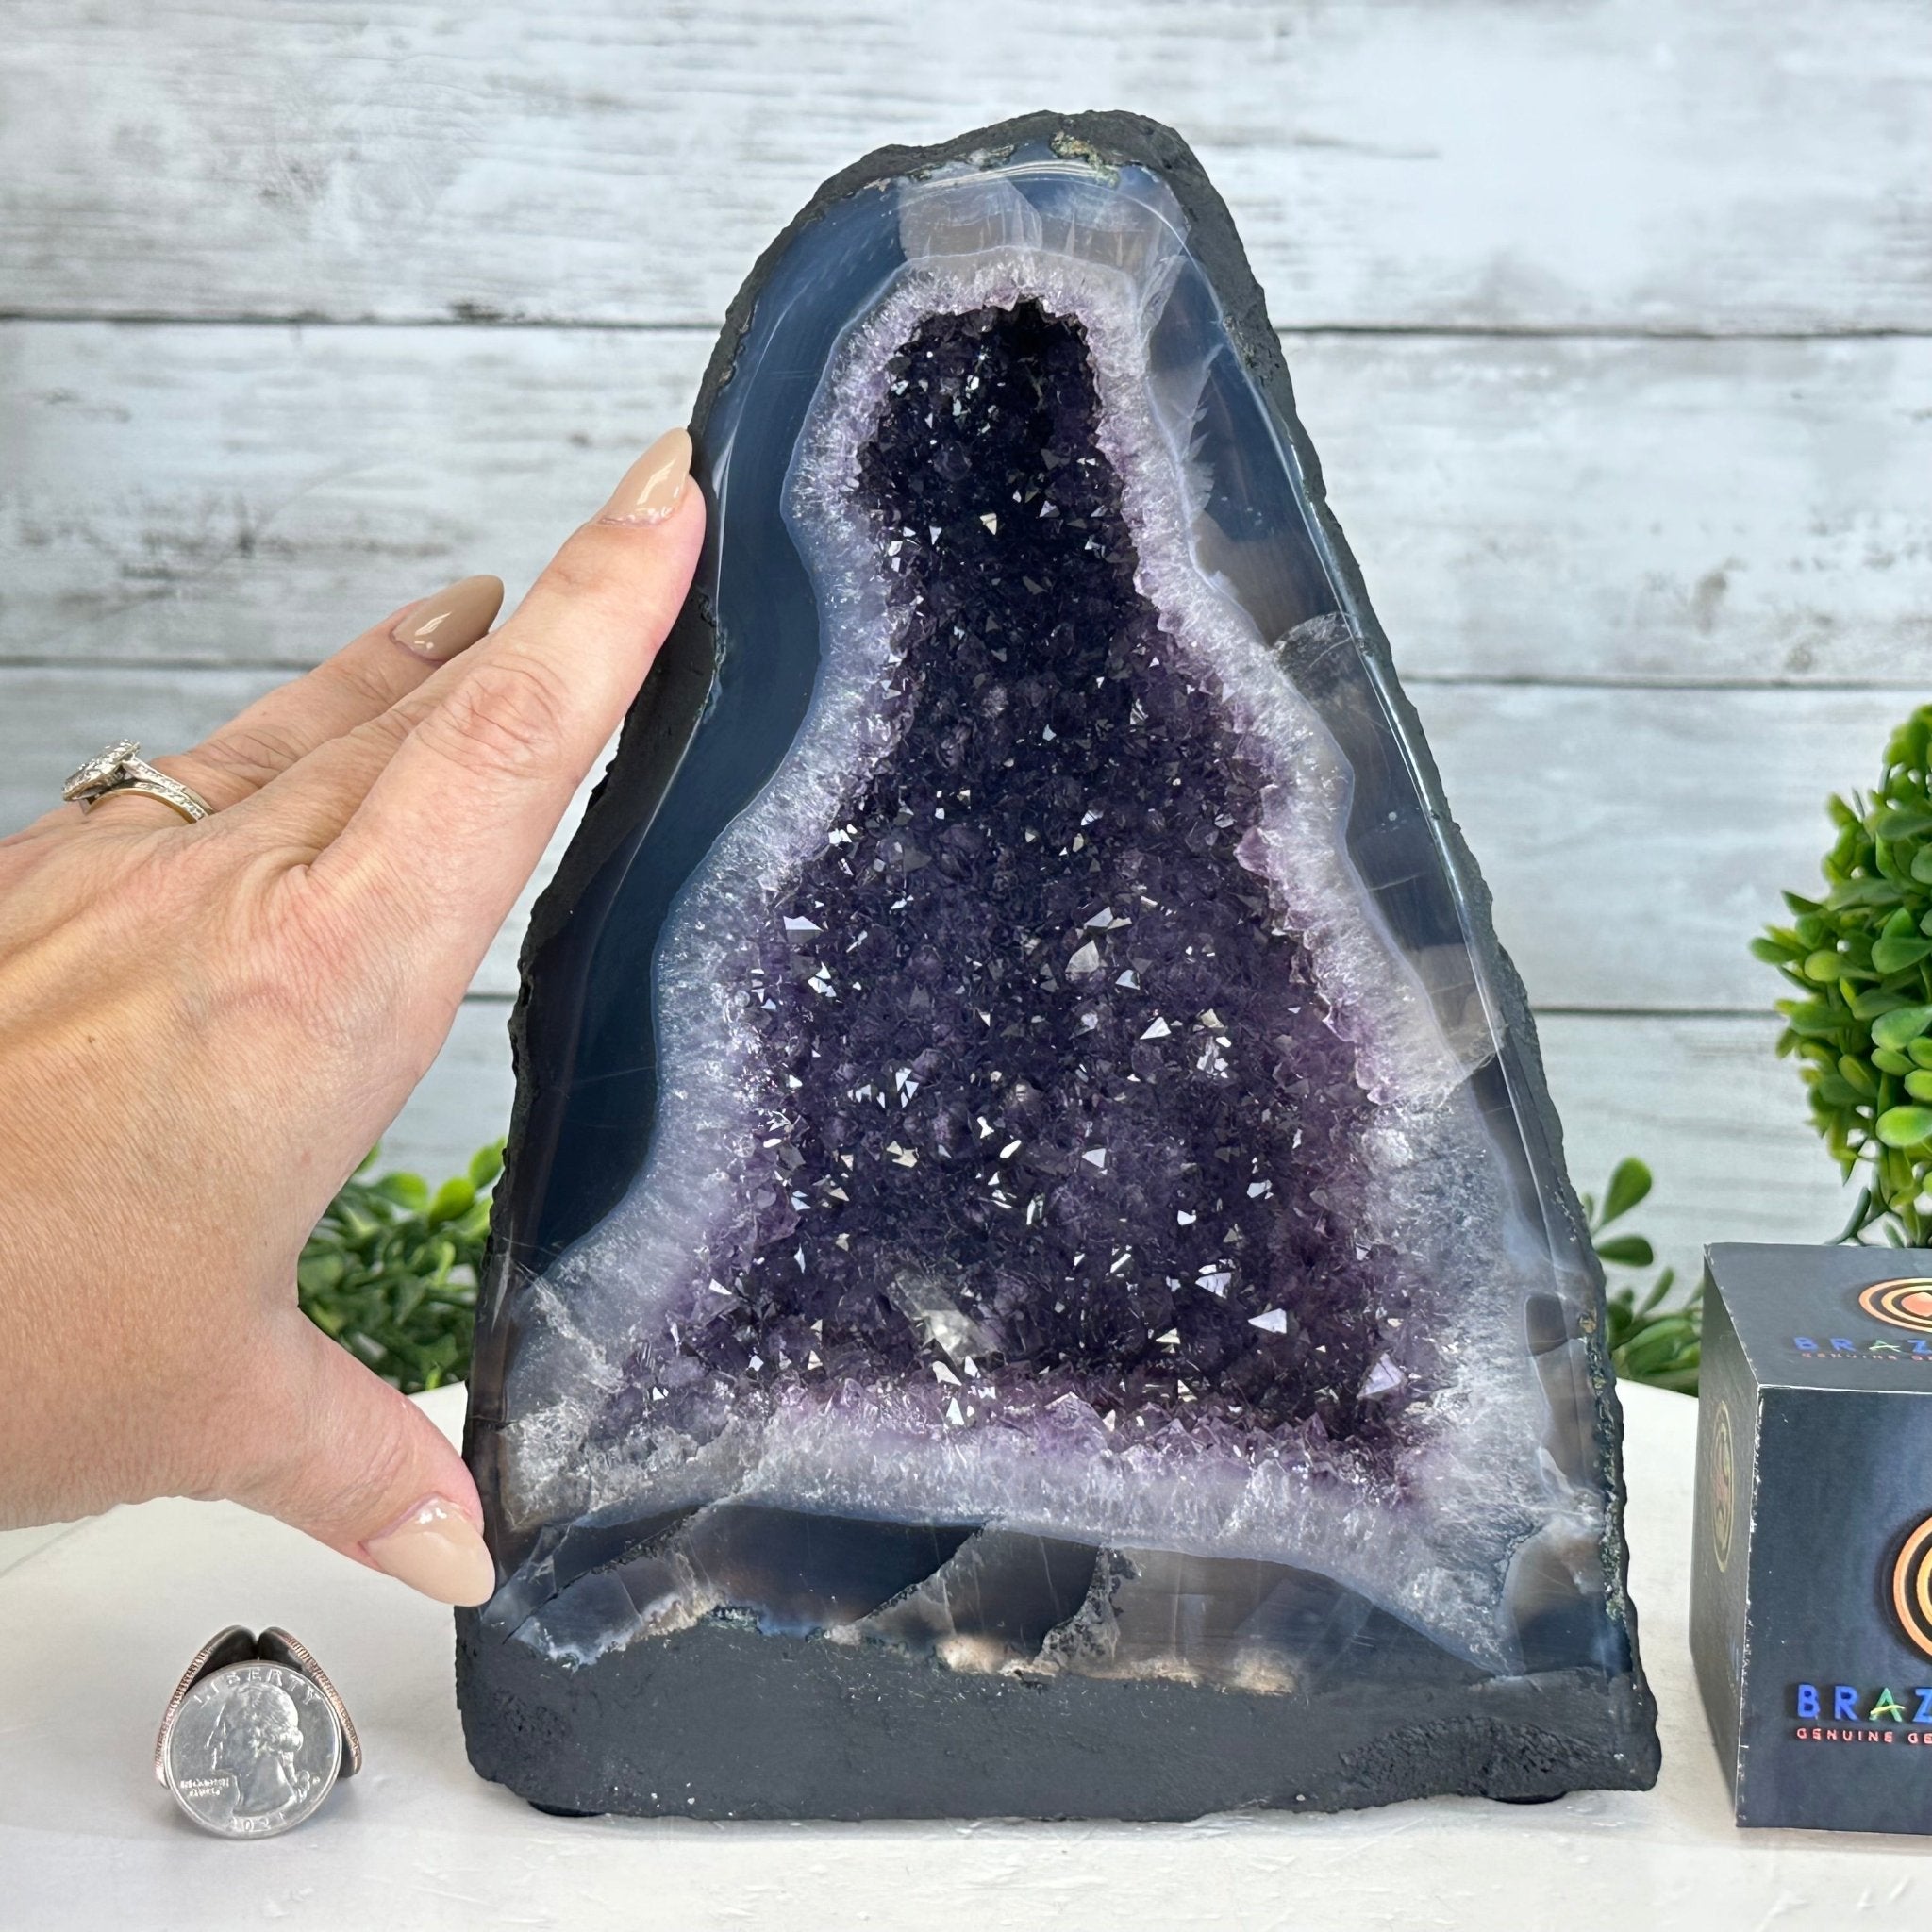 Quality Brazilian Amethyst Cathedral, 10.2 lbs & 9.3" Tall, #5601 - 1351 - Brazil GemsBrazil GemsQuality Brazilian Amethyst Cathedral, 10.2 lbs & 9.3" Tall, #5601 - 1351Cathedrals5601 - 1351